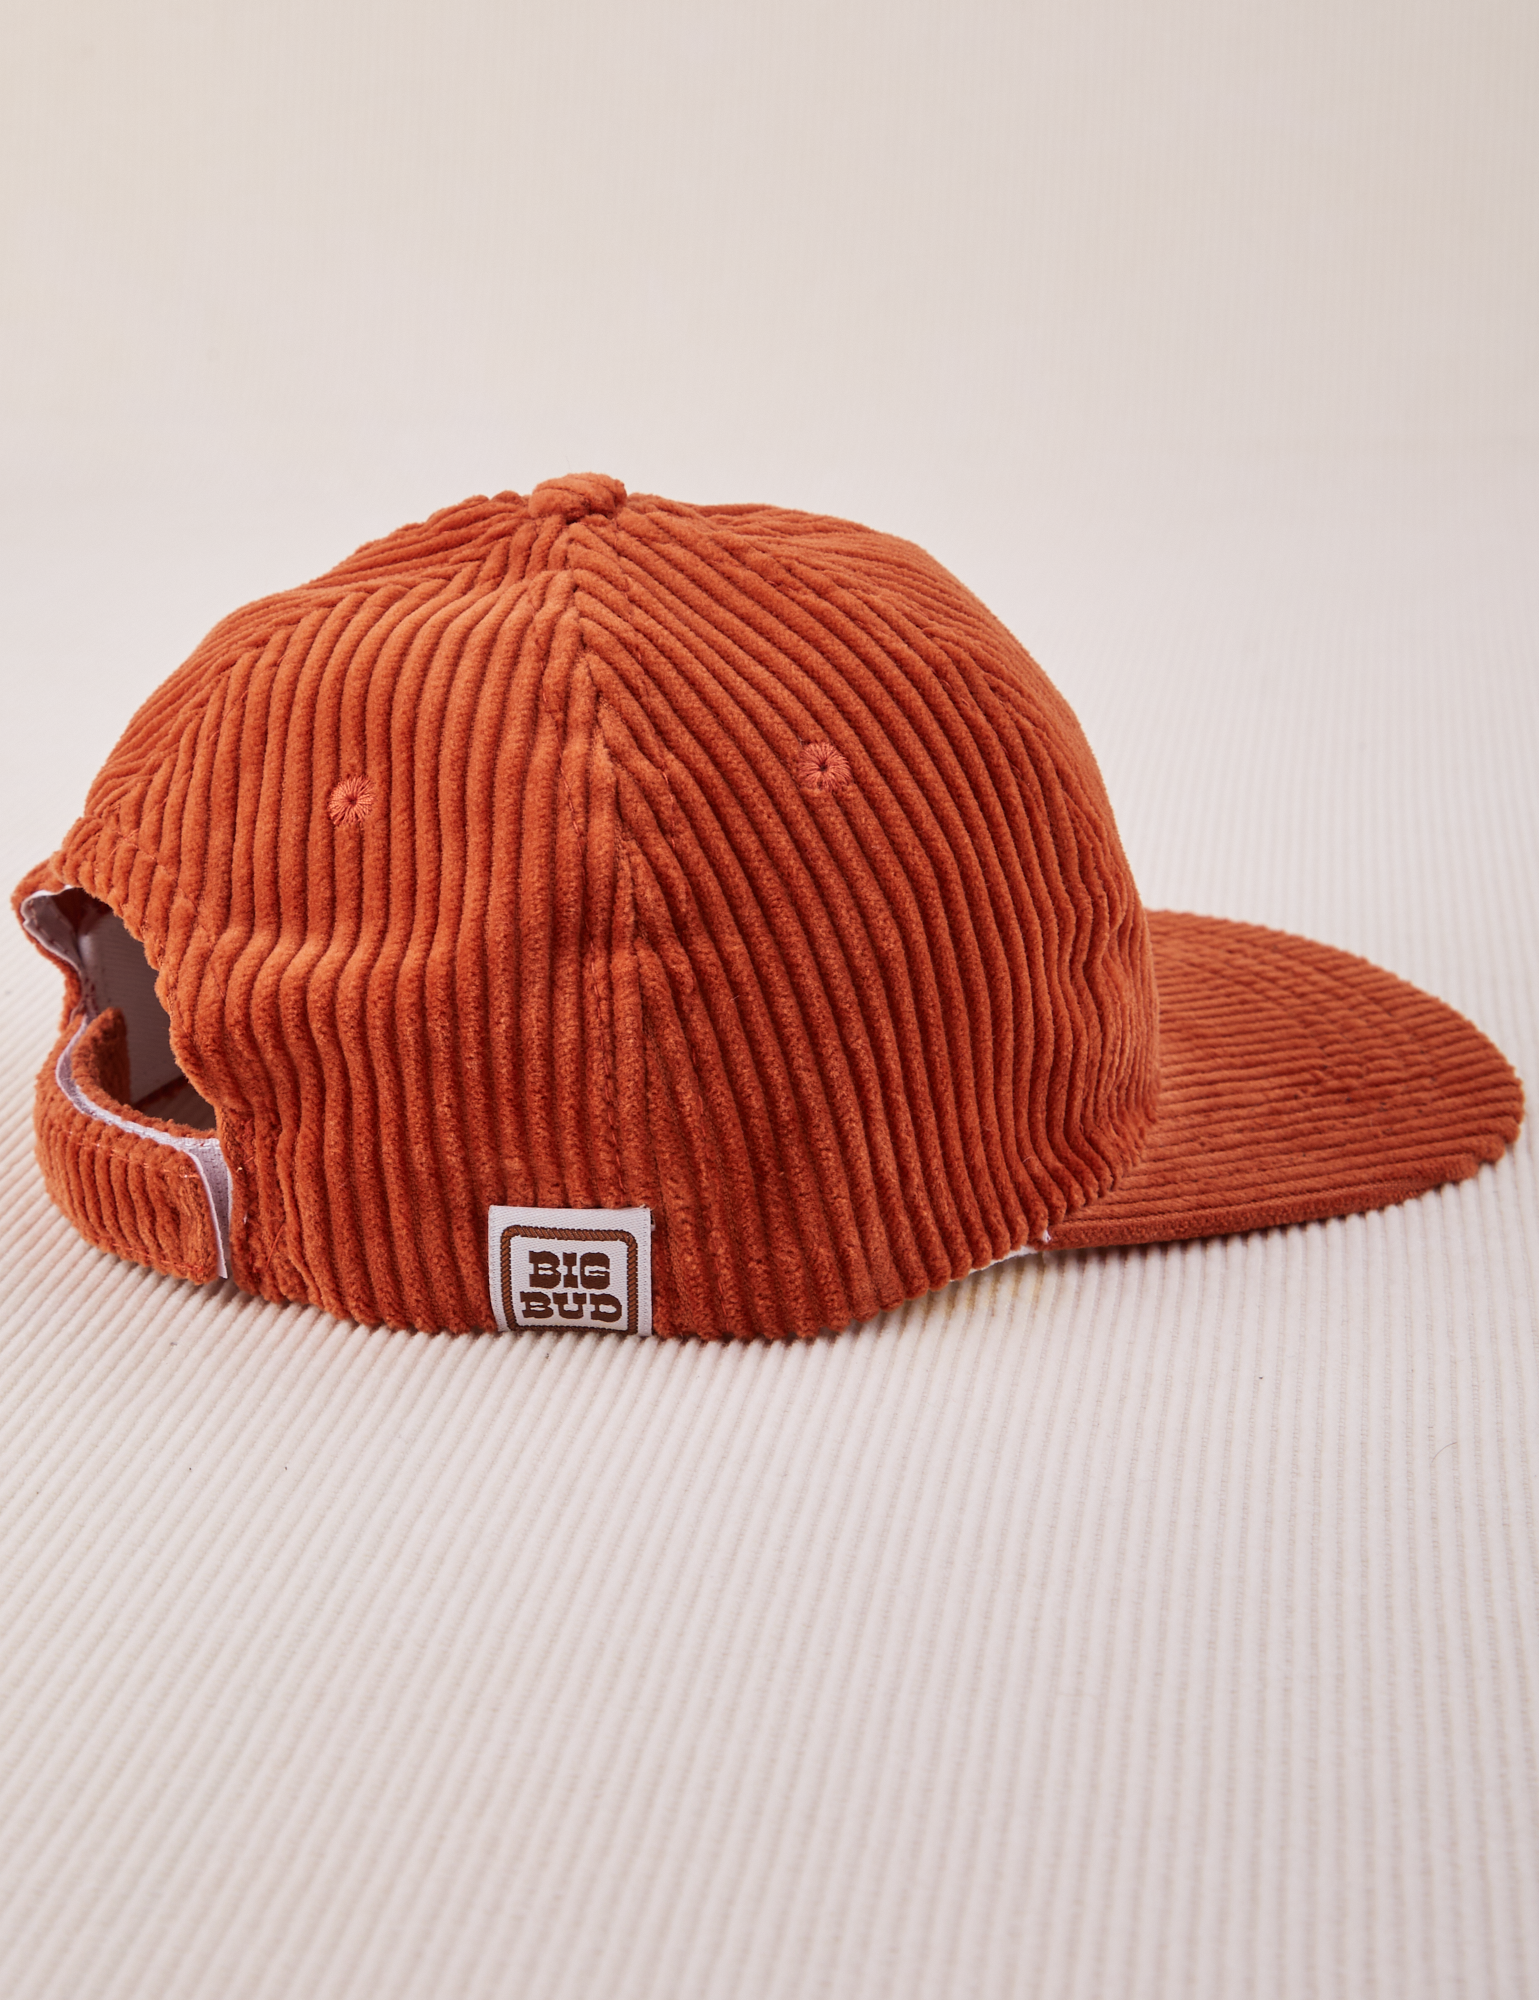 Side view of Dugout Corduroy Hat in Burnt Terracotta. Big Bud label sewn on edge of hat.